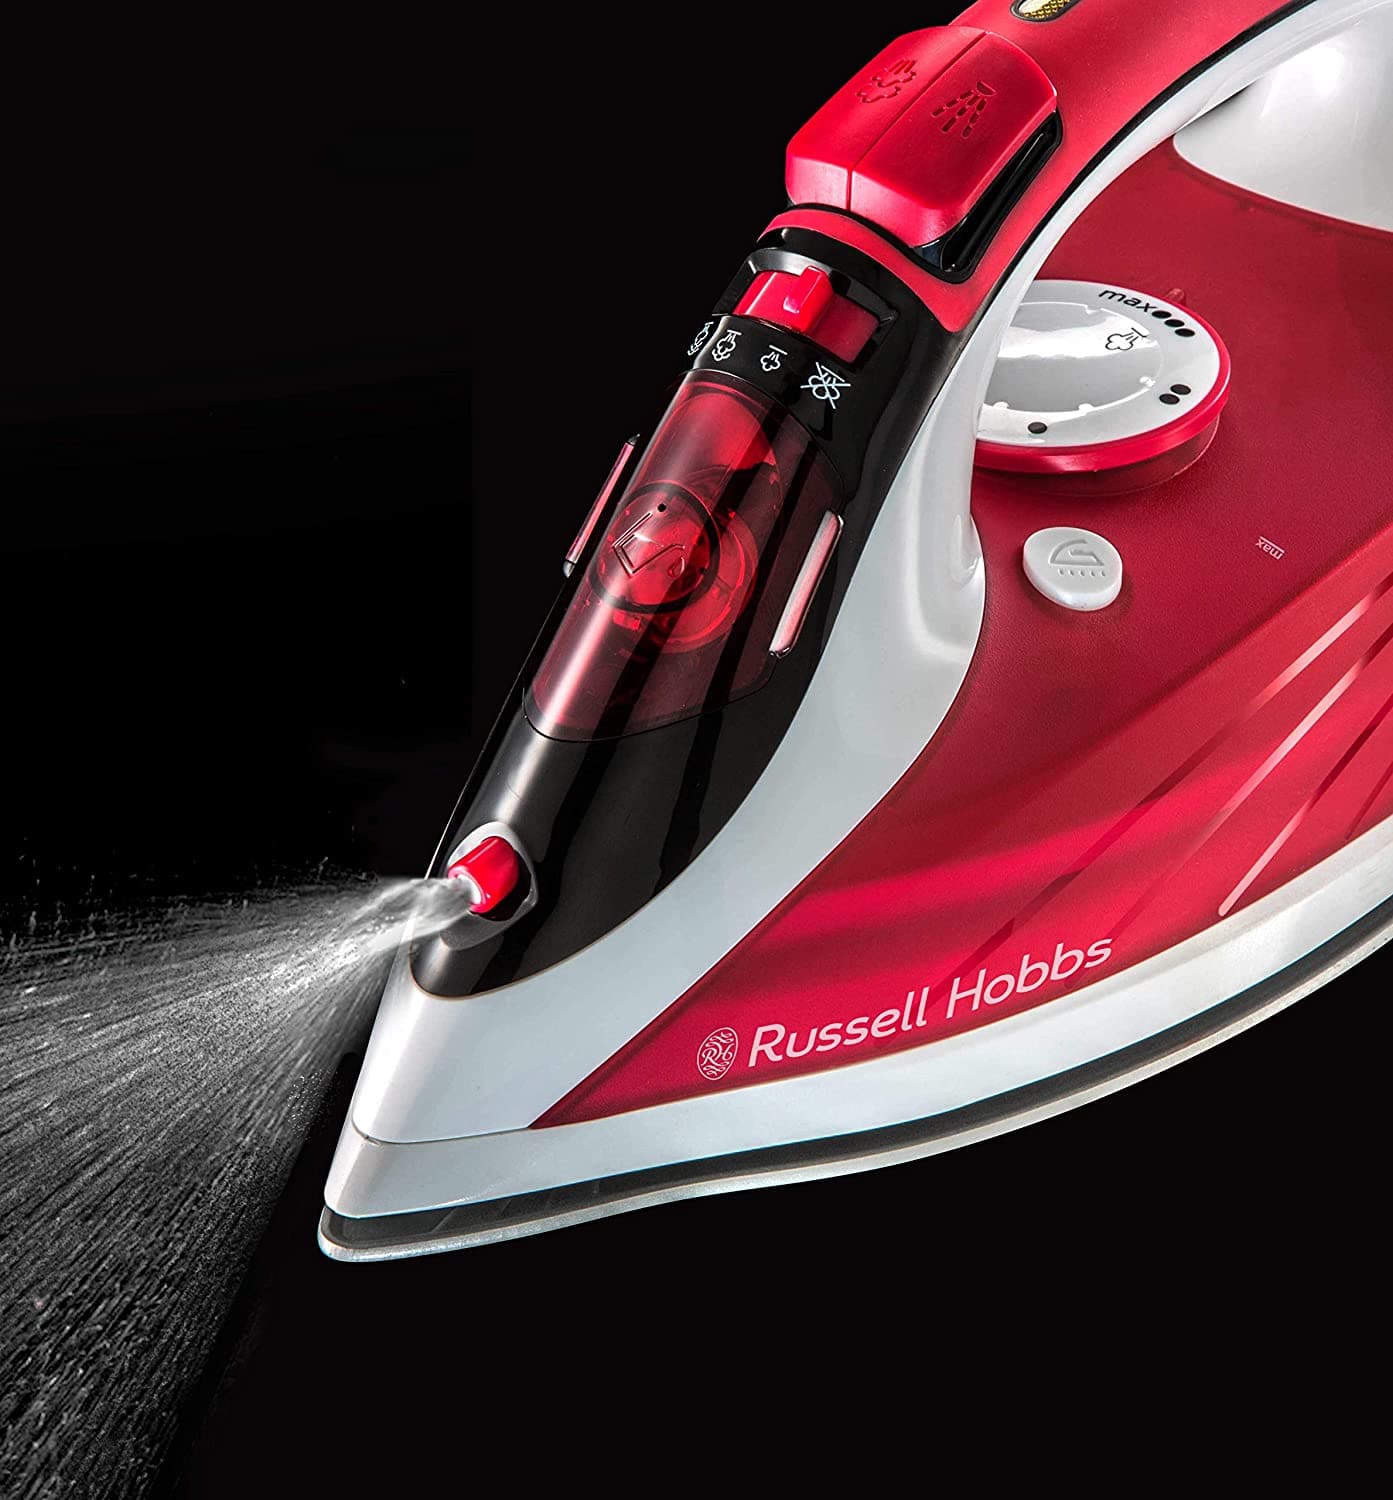 Russell Hobbs Ultra Steam Pro Red 2600W-23990GCC - Jashanmal Home